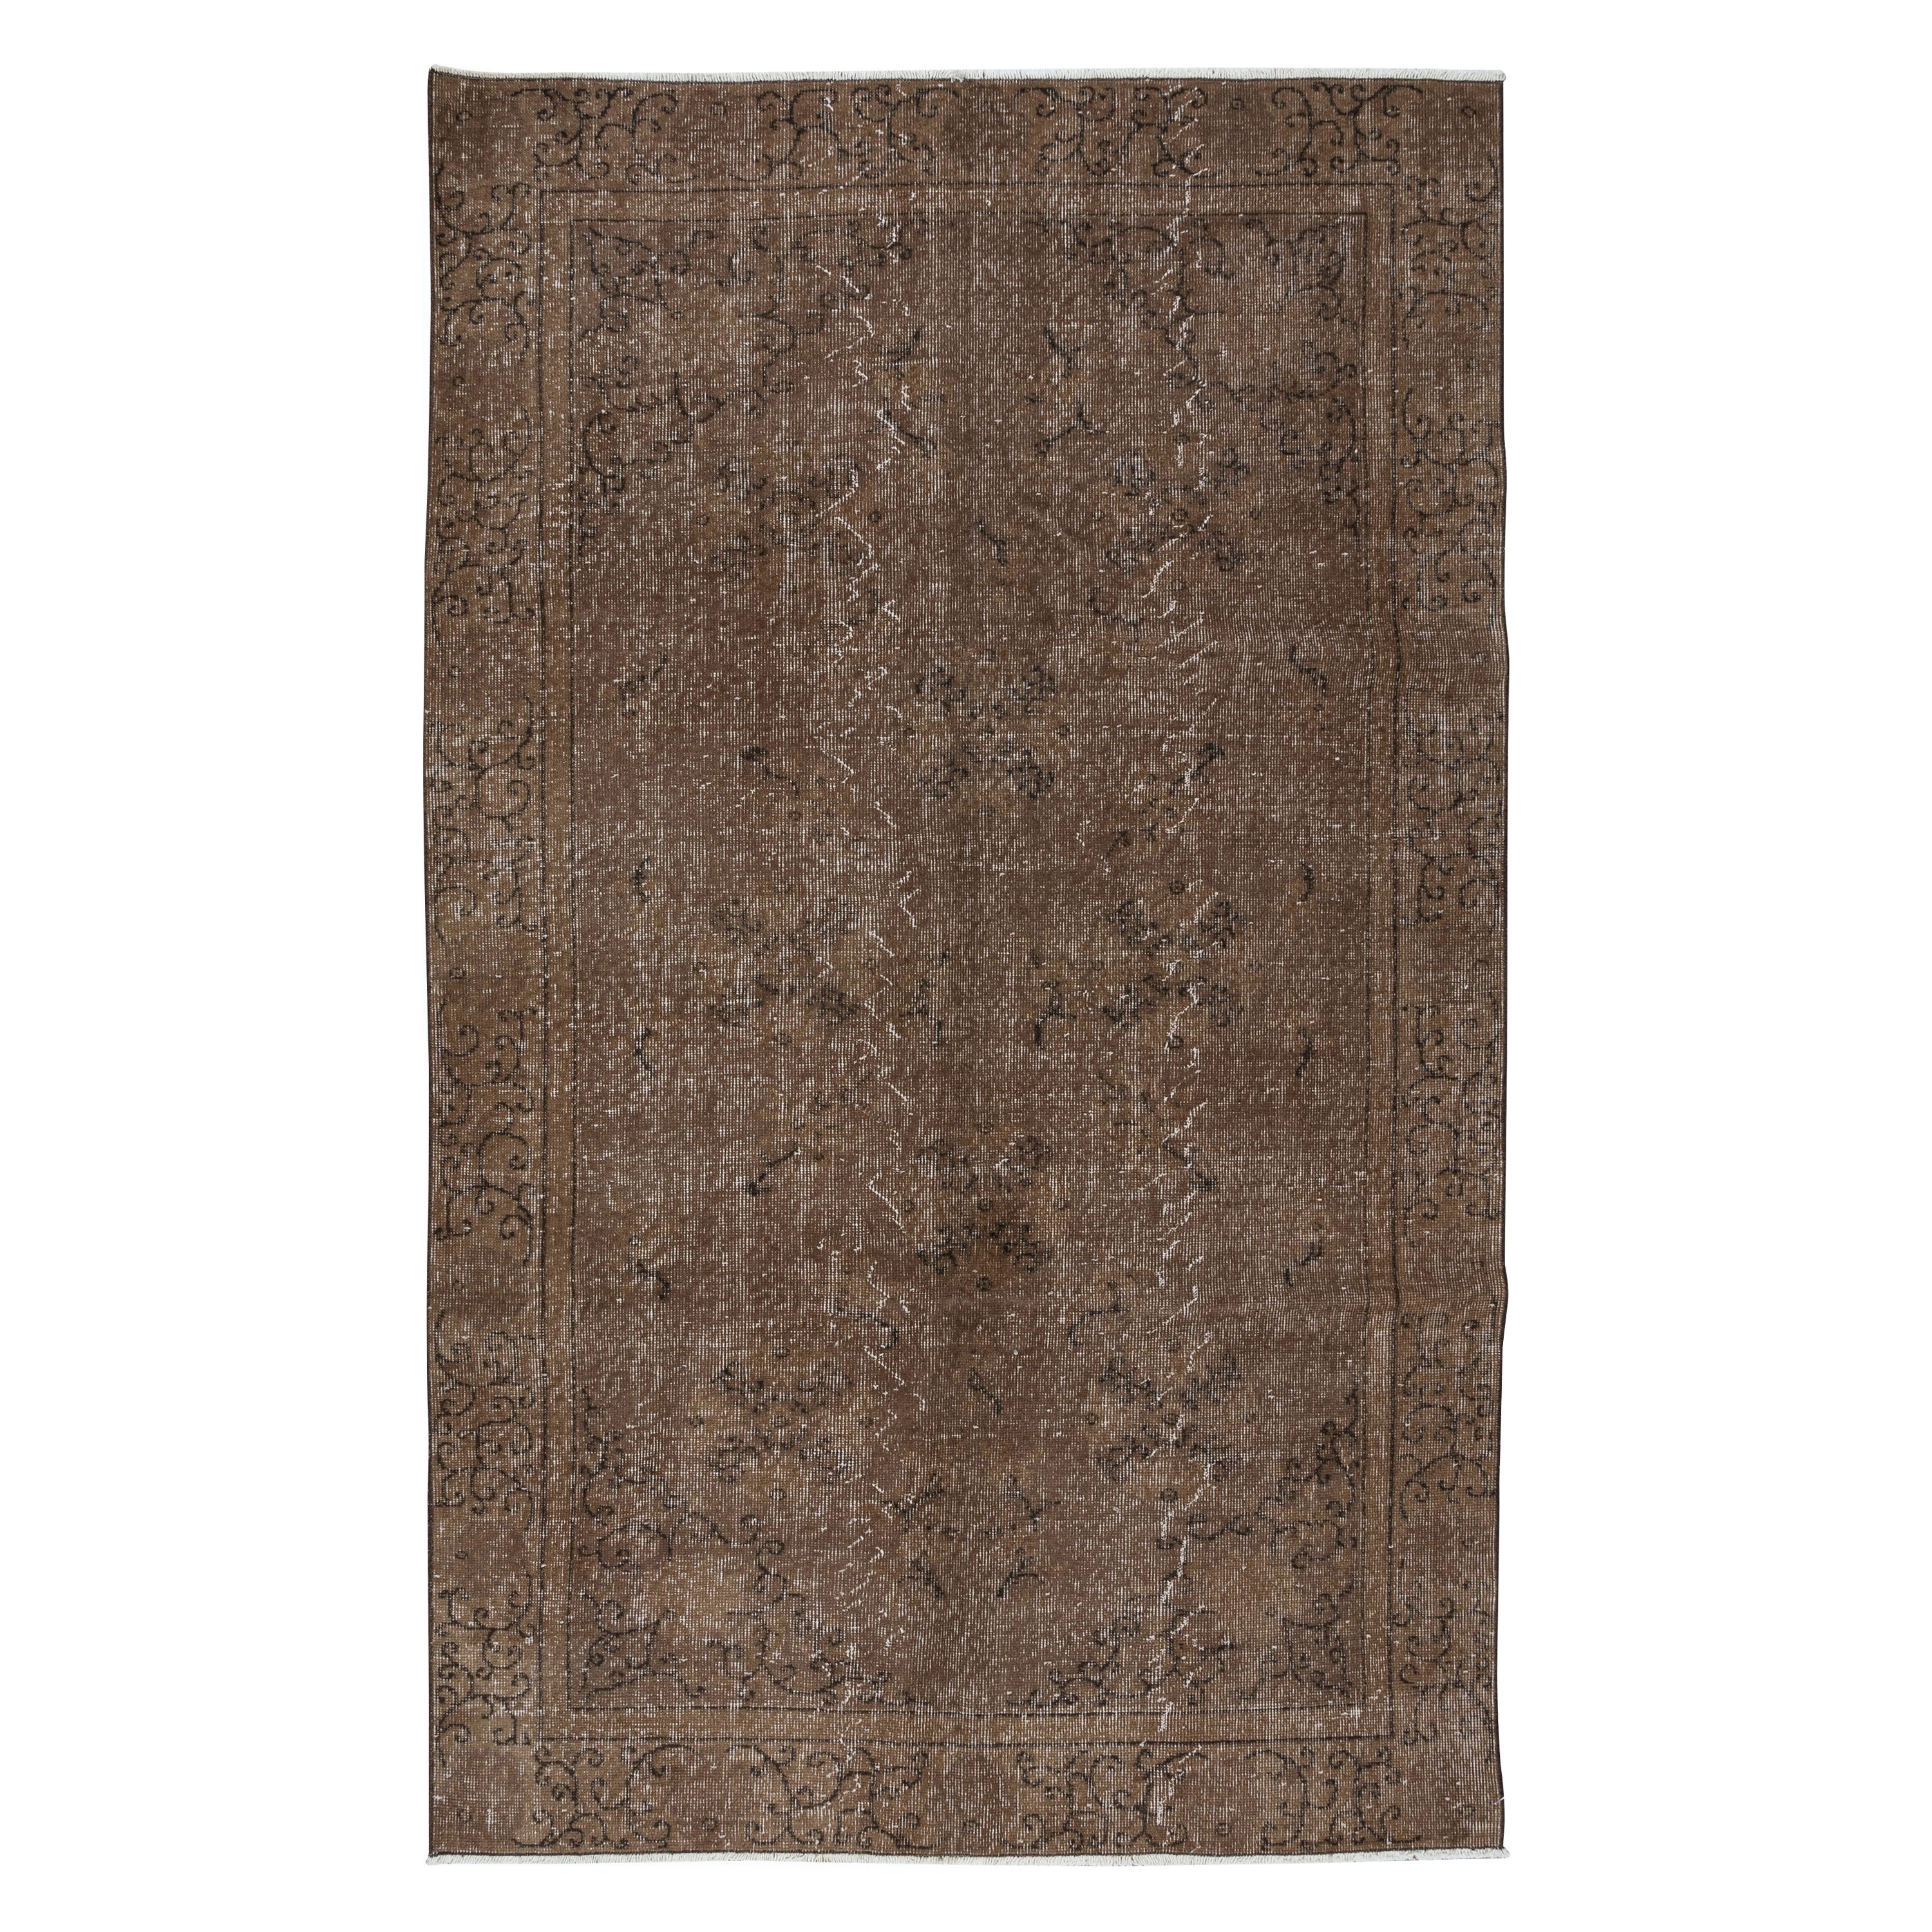 5.2x8.5 Ft Handmade Turkish Rug Re-Dyed in Brown for Modern Living Room Decor For Sale